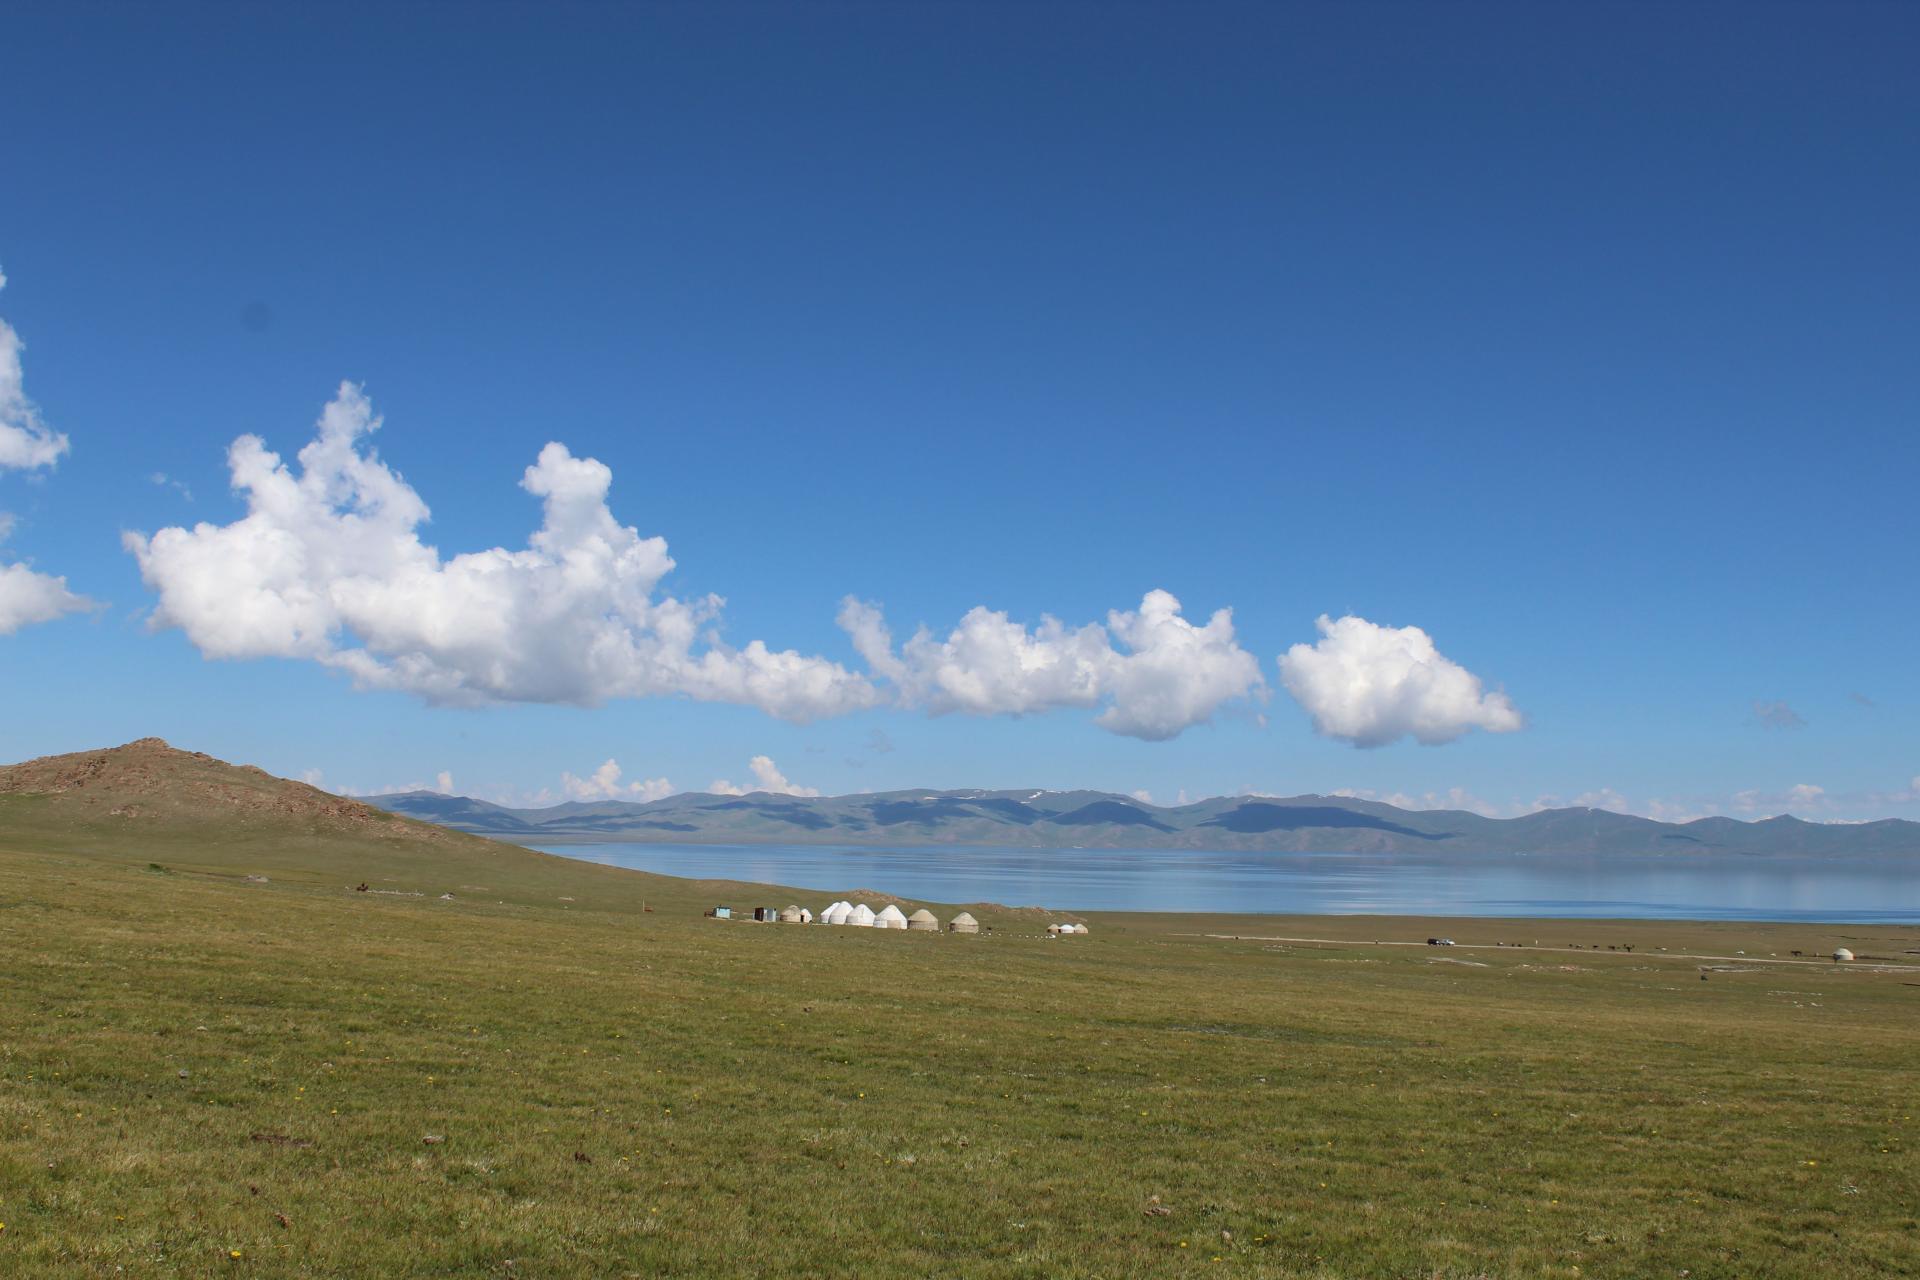 The Son-Kul summer pastures, Naryn province, Kyrgyzstan 